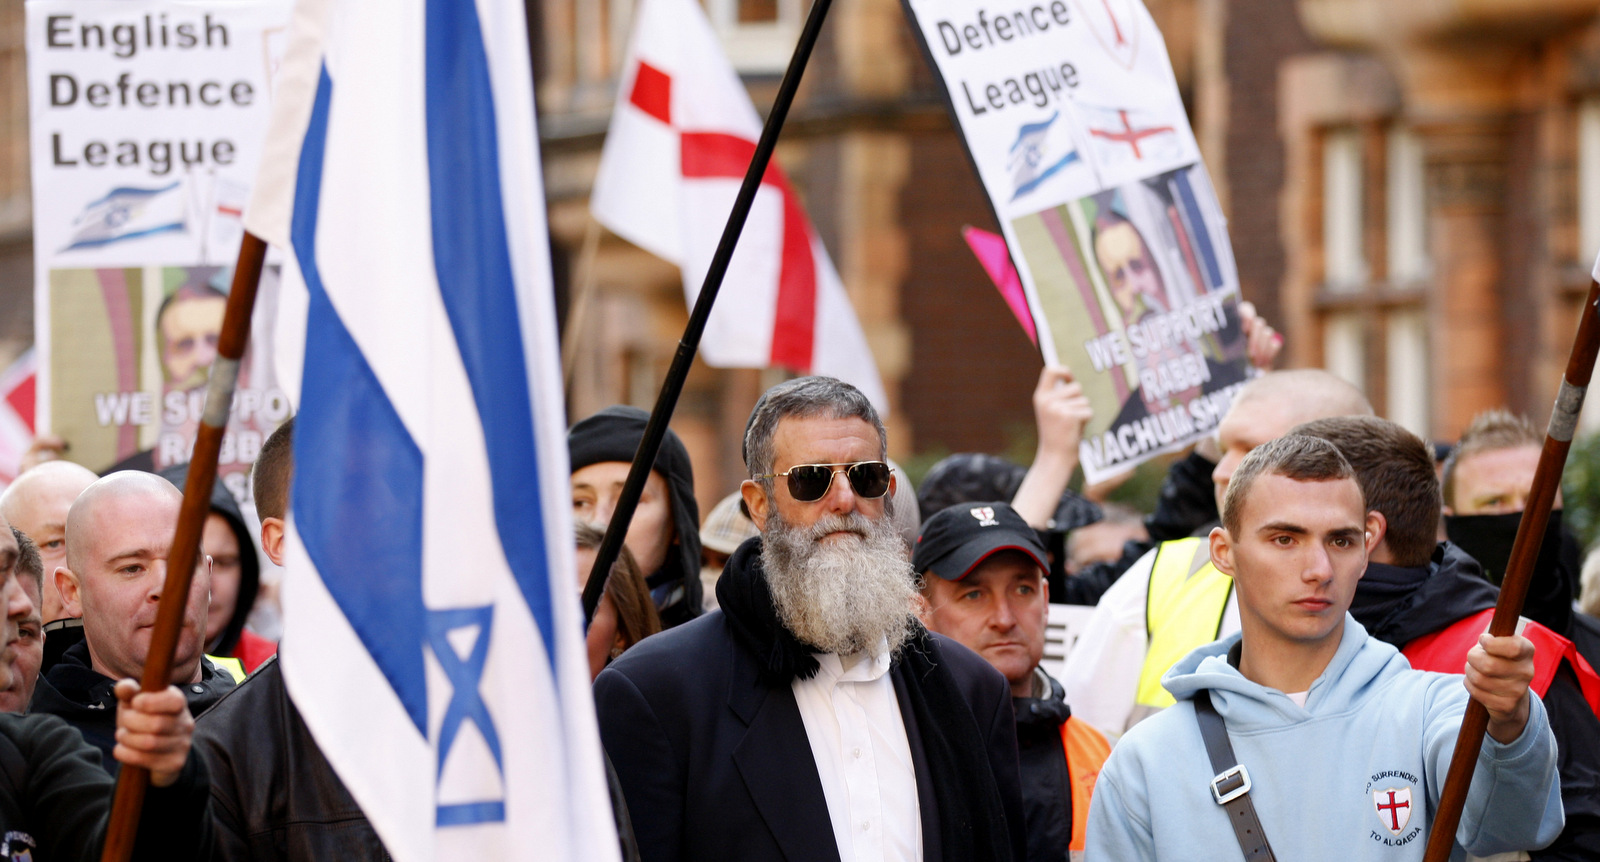 Rabbi Nachum Shifren, center, marches with white nationalist English Defence League (EDL) supporters to an EDL rally against what they claim is the Islamification of the UK and in support of Israel, outside the Israeli Embassy in London, Oct. 24, 2010. (AP/Sang Tan)